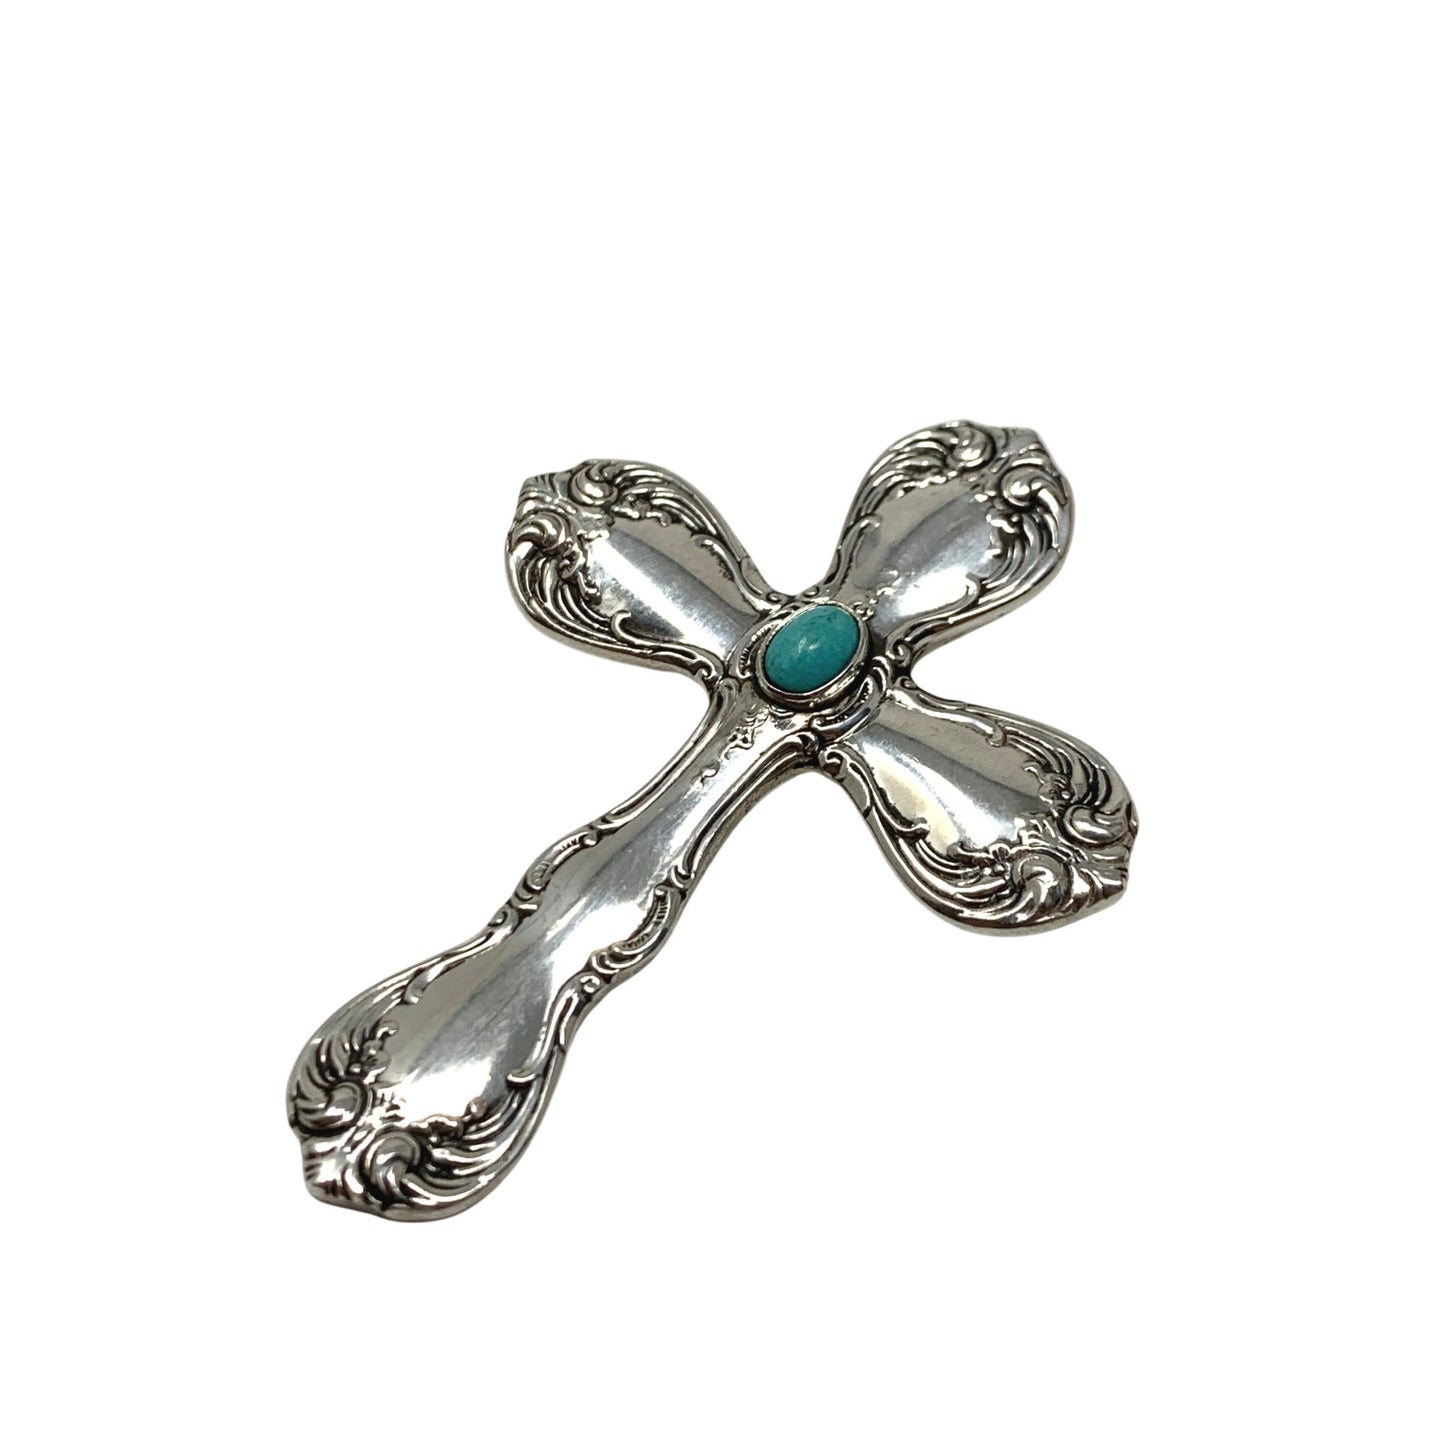 Towle Old Master Sterling & Turquoise Pendant